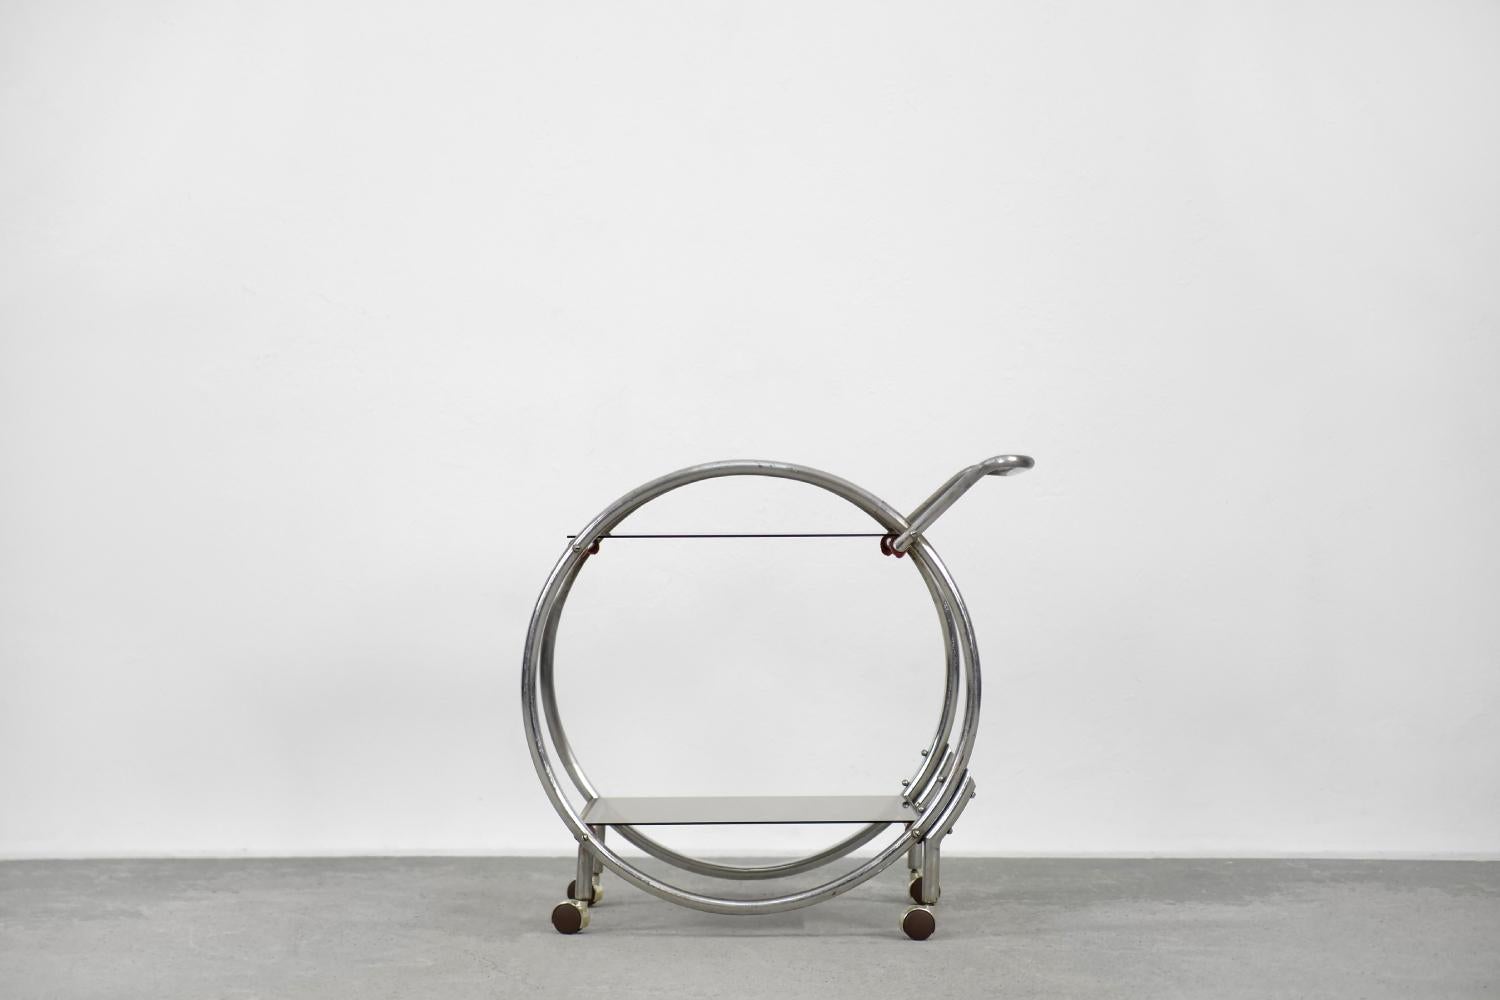 This two-level, circular bar table was made during the 1930s. This form refers to the designs of the Bauhaus school and the Art dèco style. The geometric frame is made of chromed tubular steel. This cart has two brown-smoked glass tops and mobile